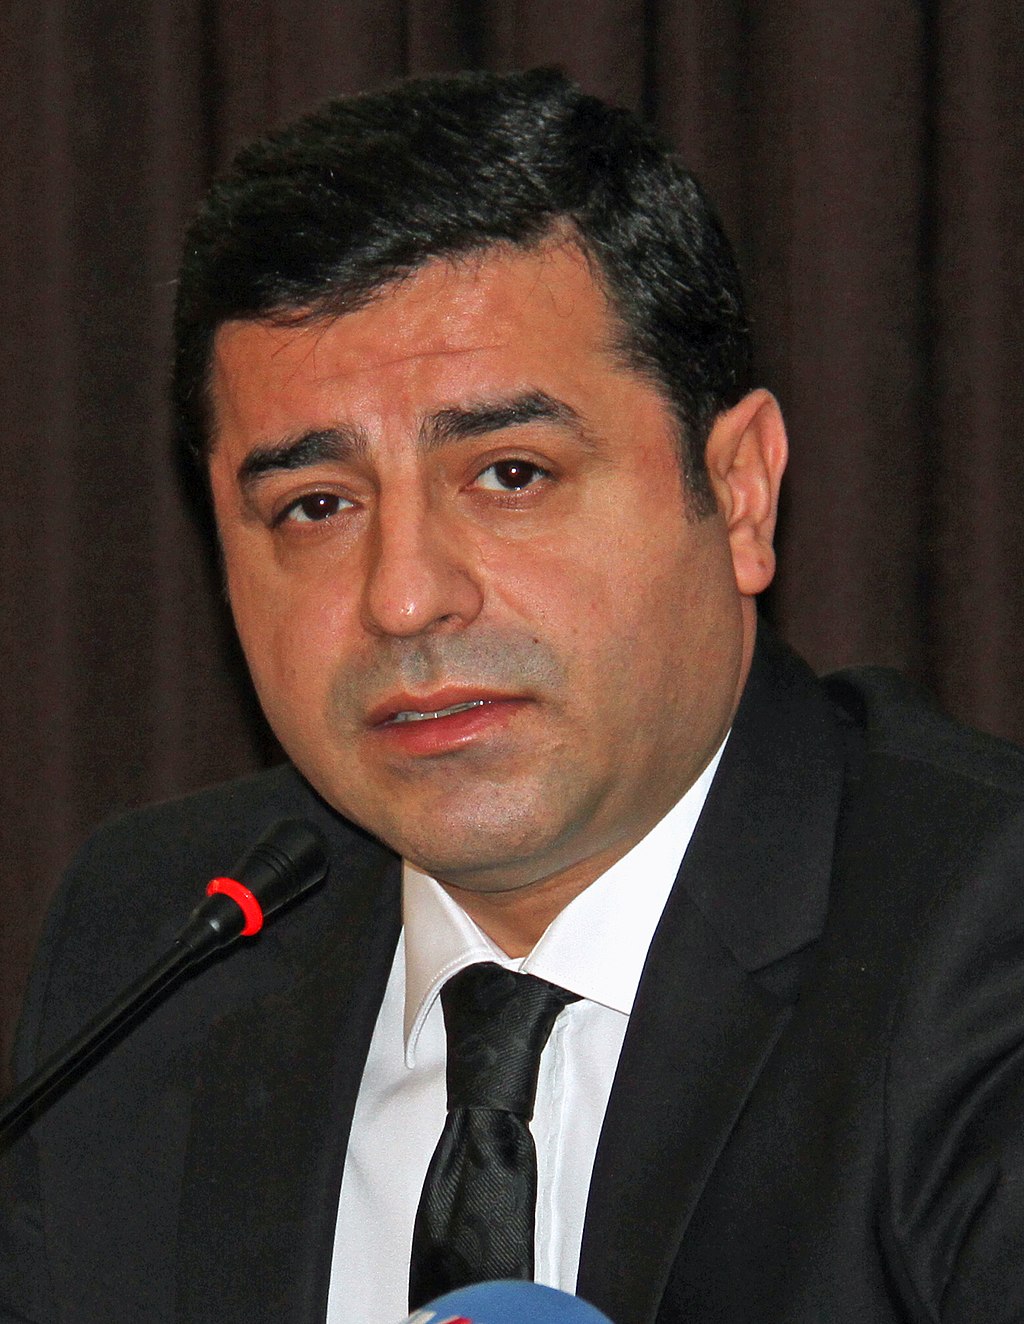 Writer Selahattin Demirtaş sentenced to 42 years by Turkish court on jumped up ‘terrorist propaganda’ charges cover image